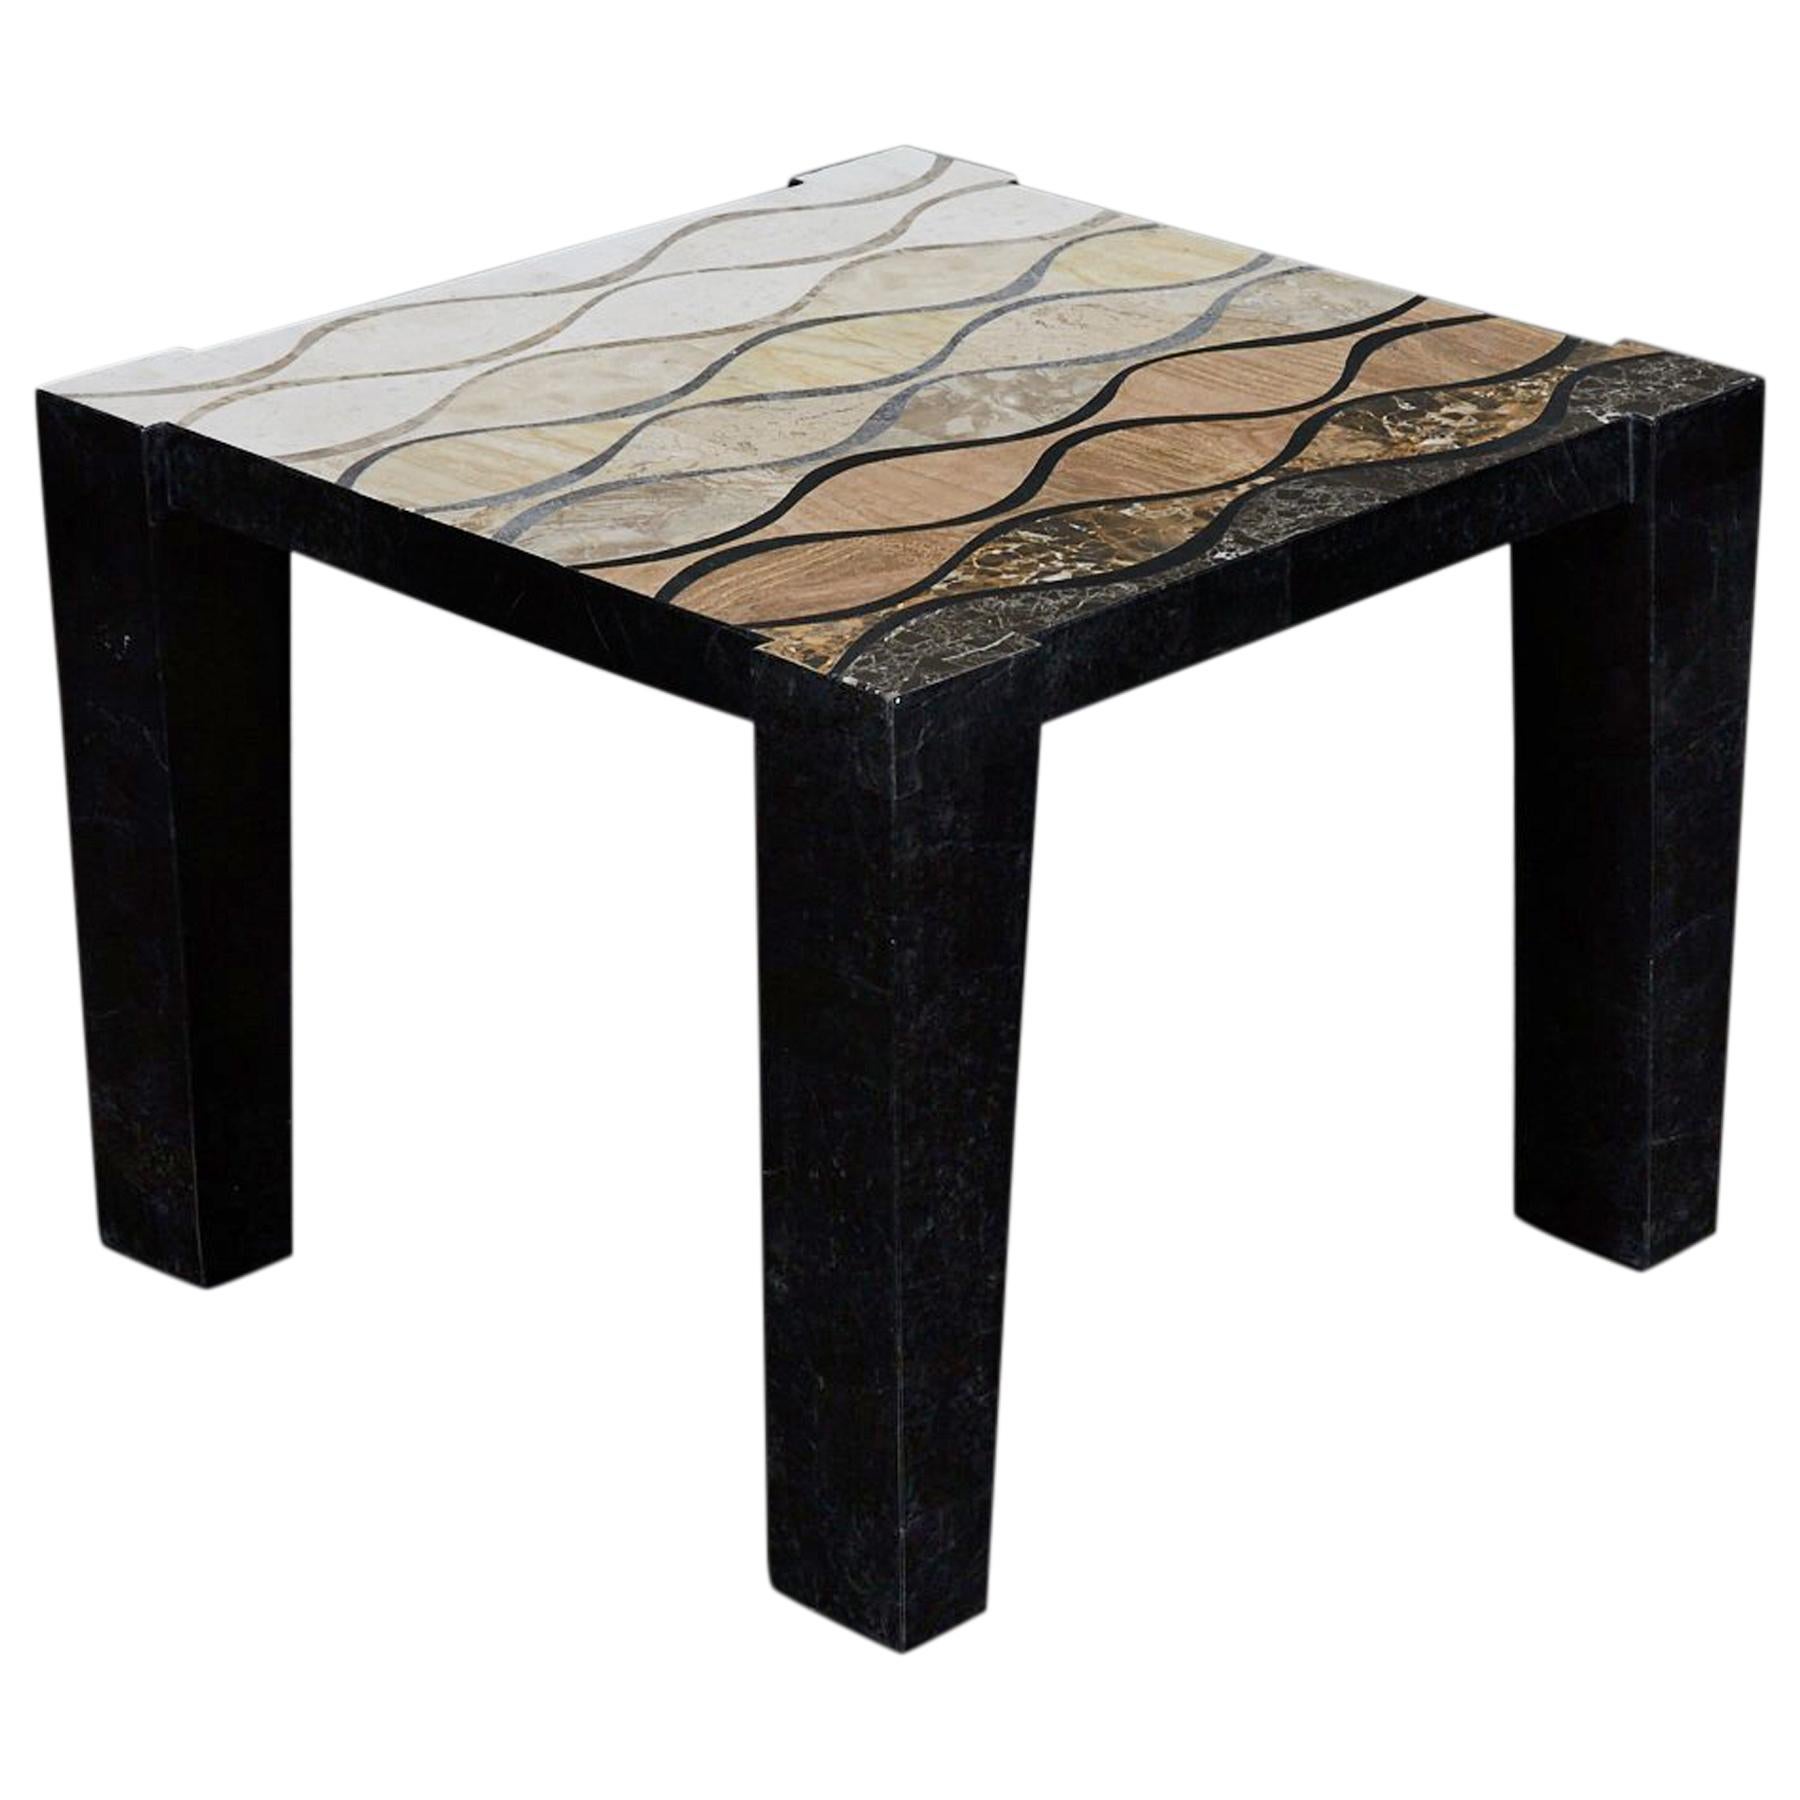 Tessellated Stone "Curves" Side Table with Abstract Inlaid Detailing, 1990s For Sale